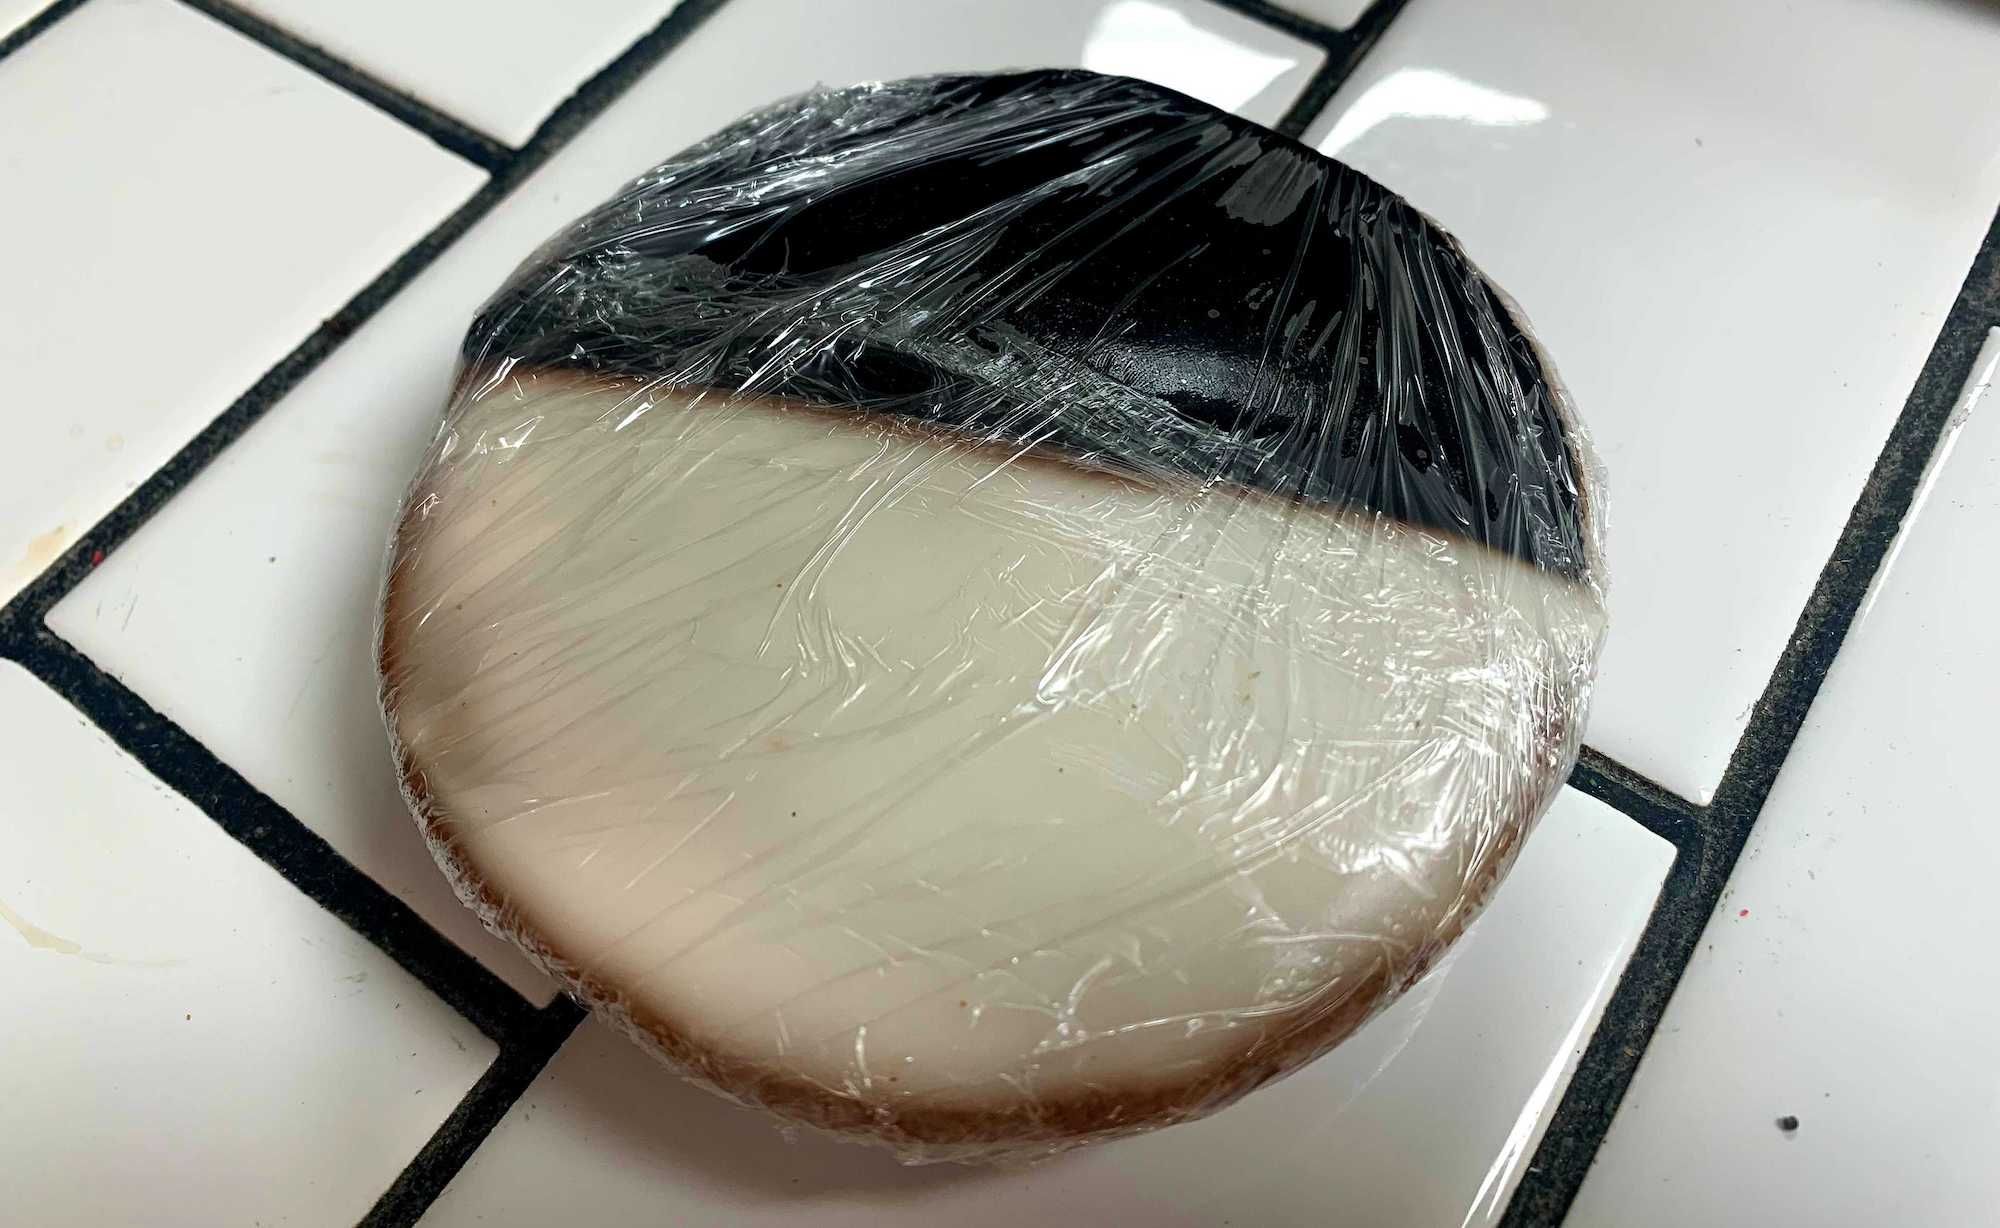 Black and white cookie in saran wrap on tiled counter.